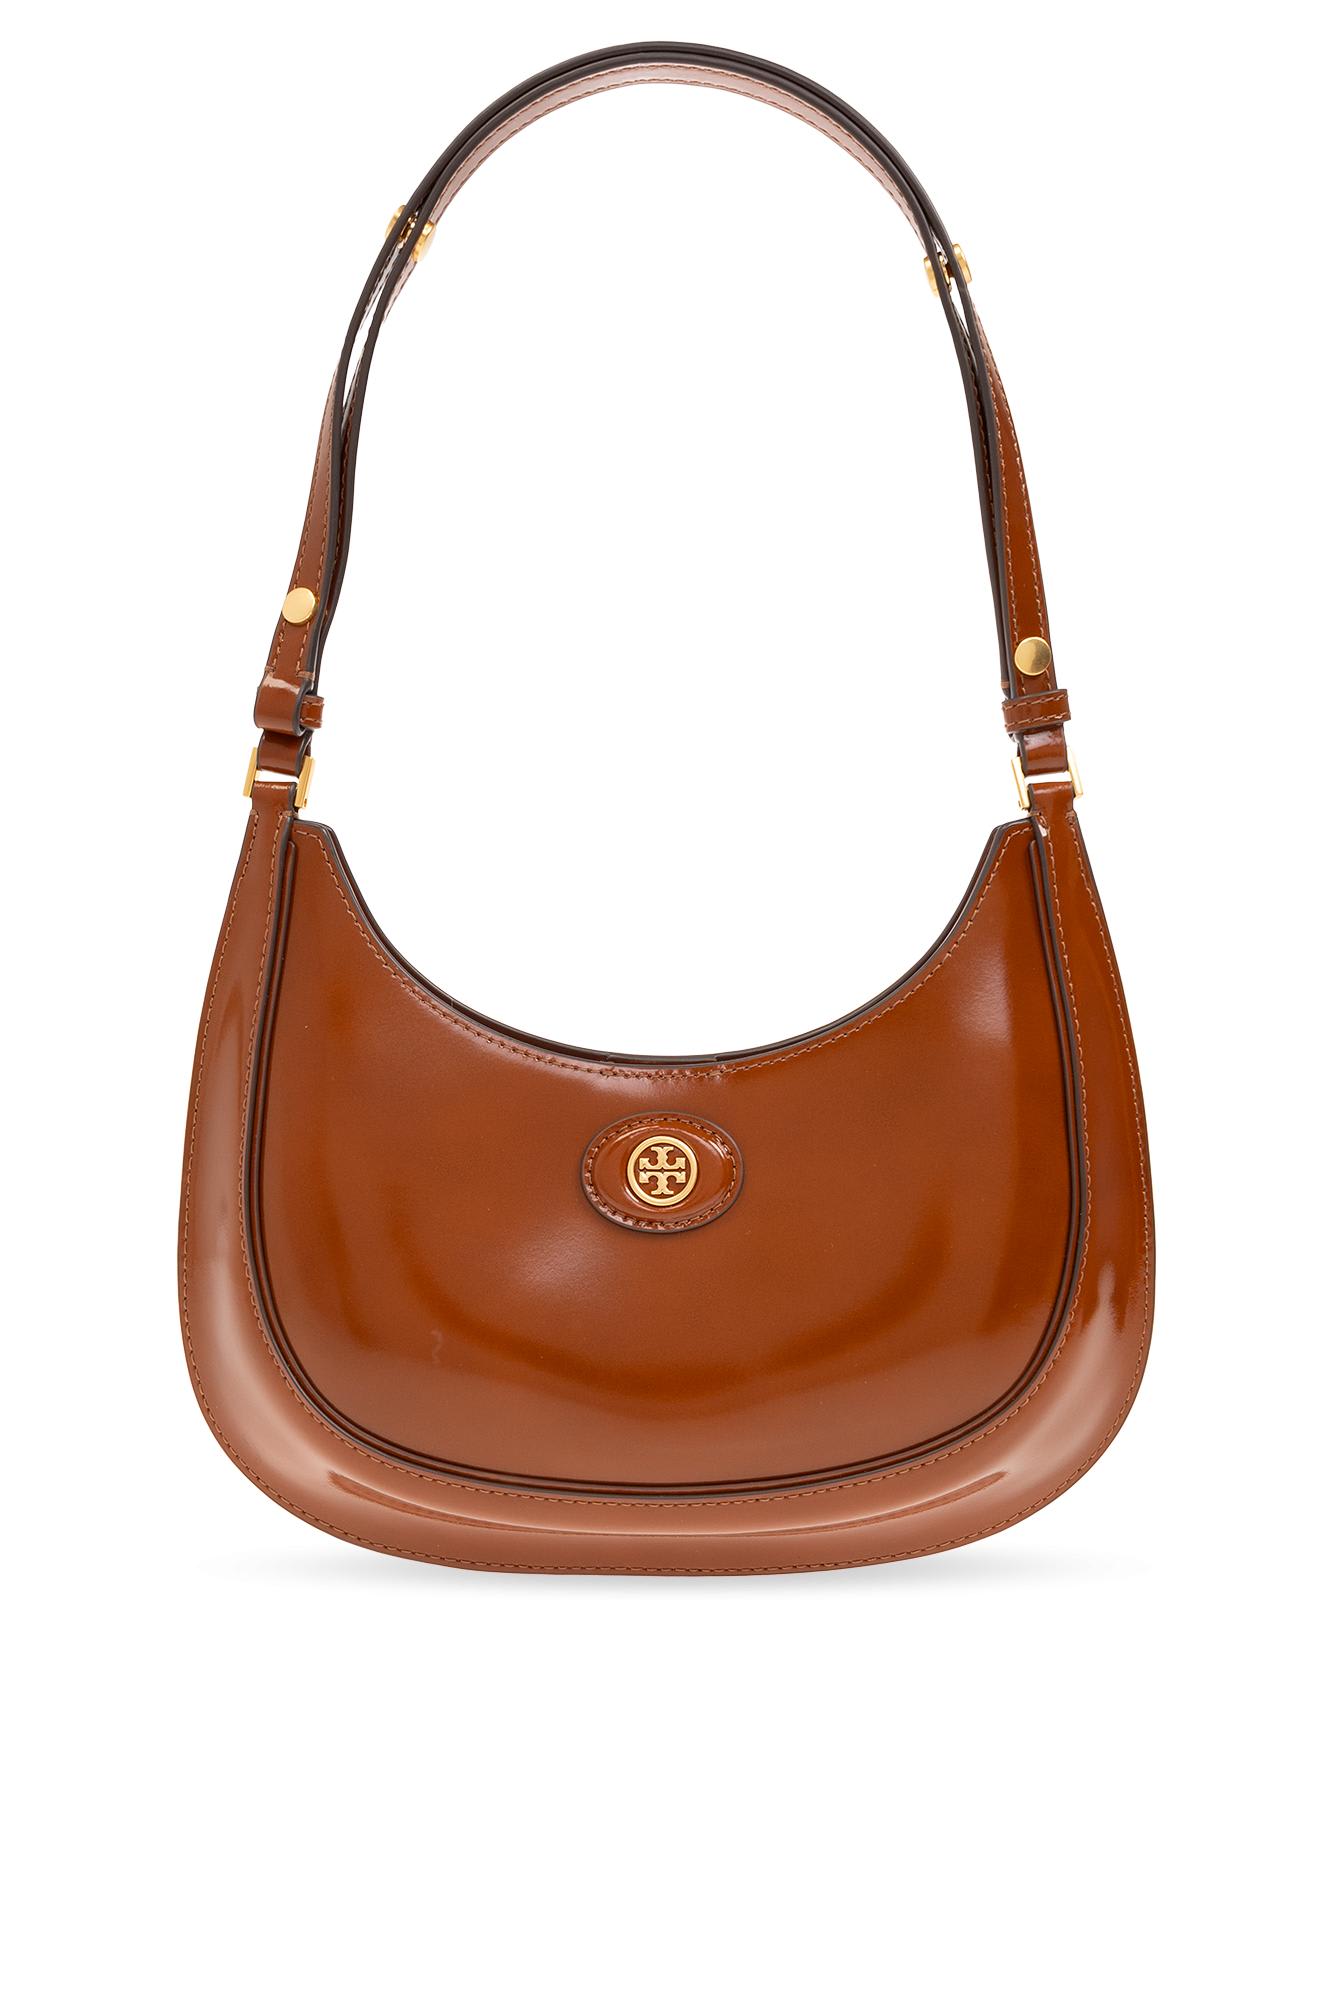 Tory Burch Robinson Shoulder Bag In Leather Brown